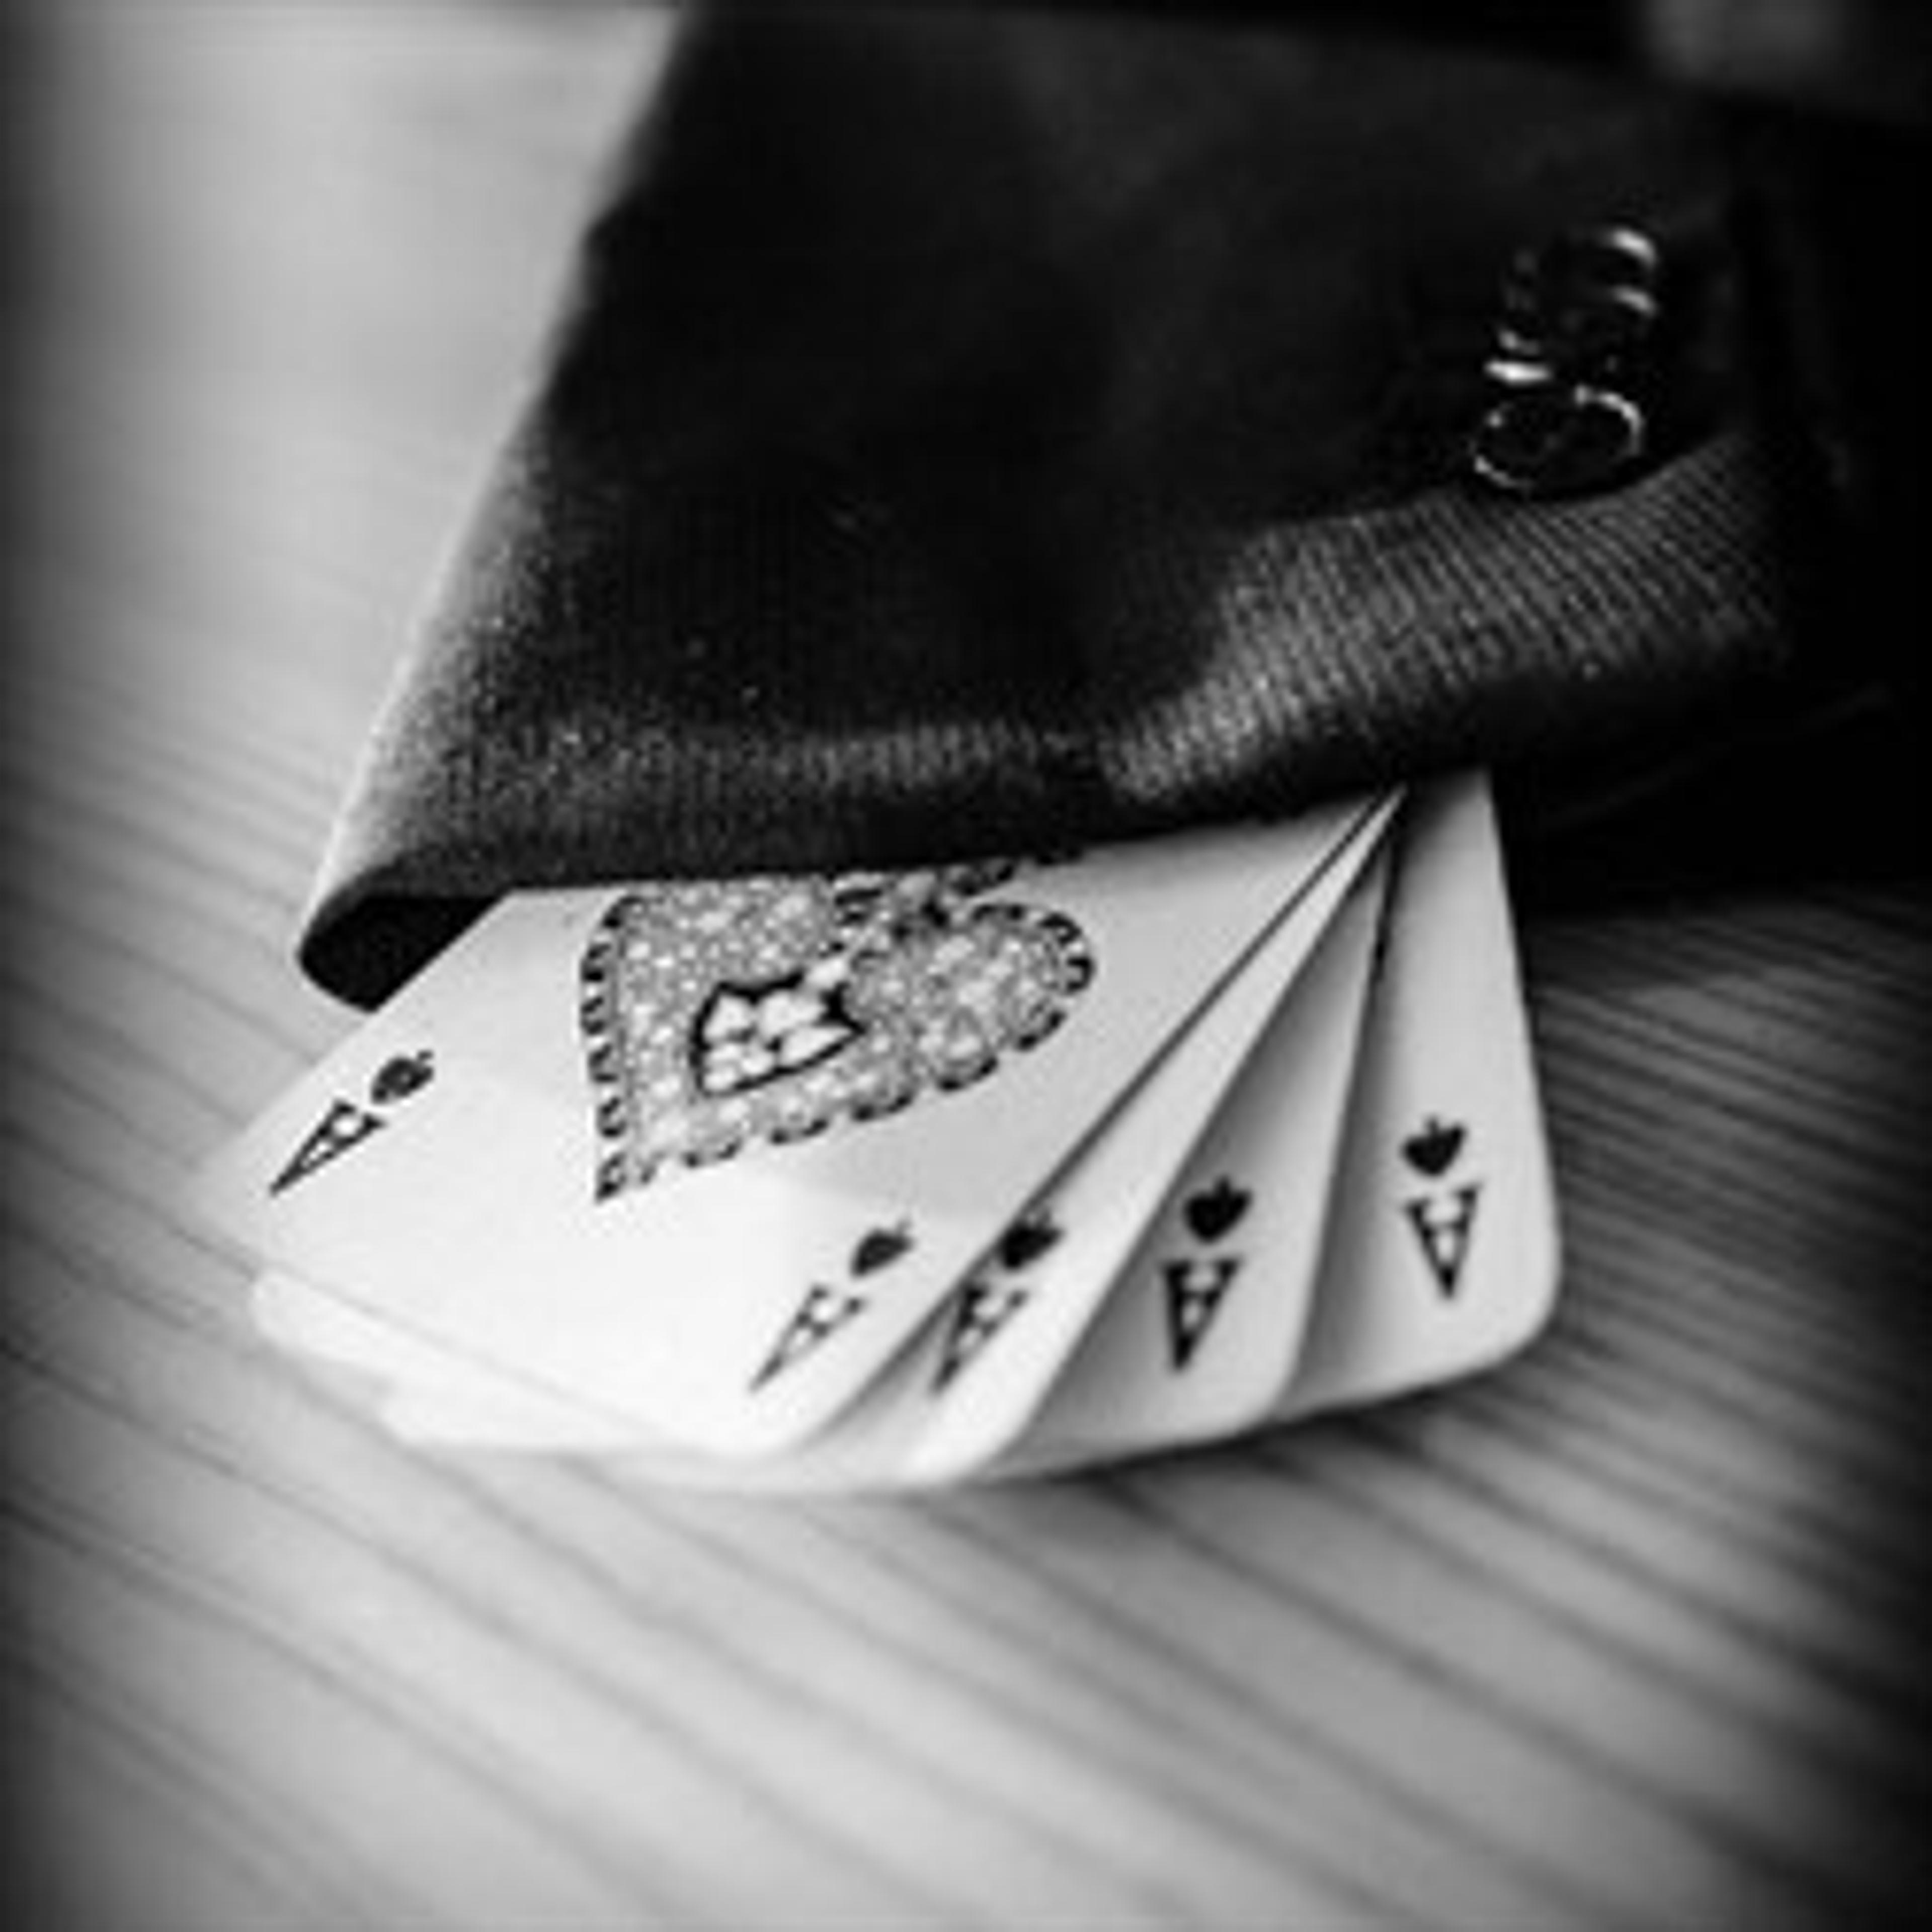 Card Up Your Sleeve